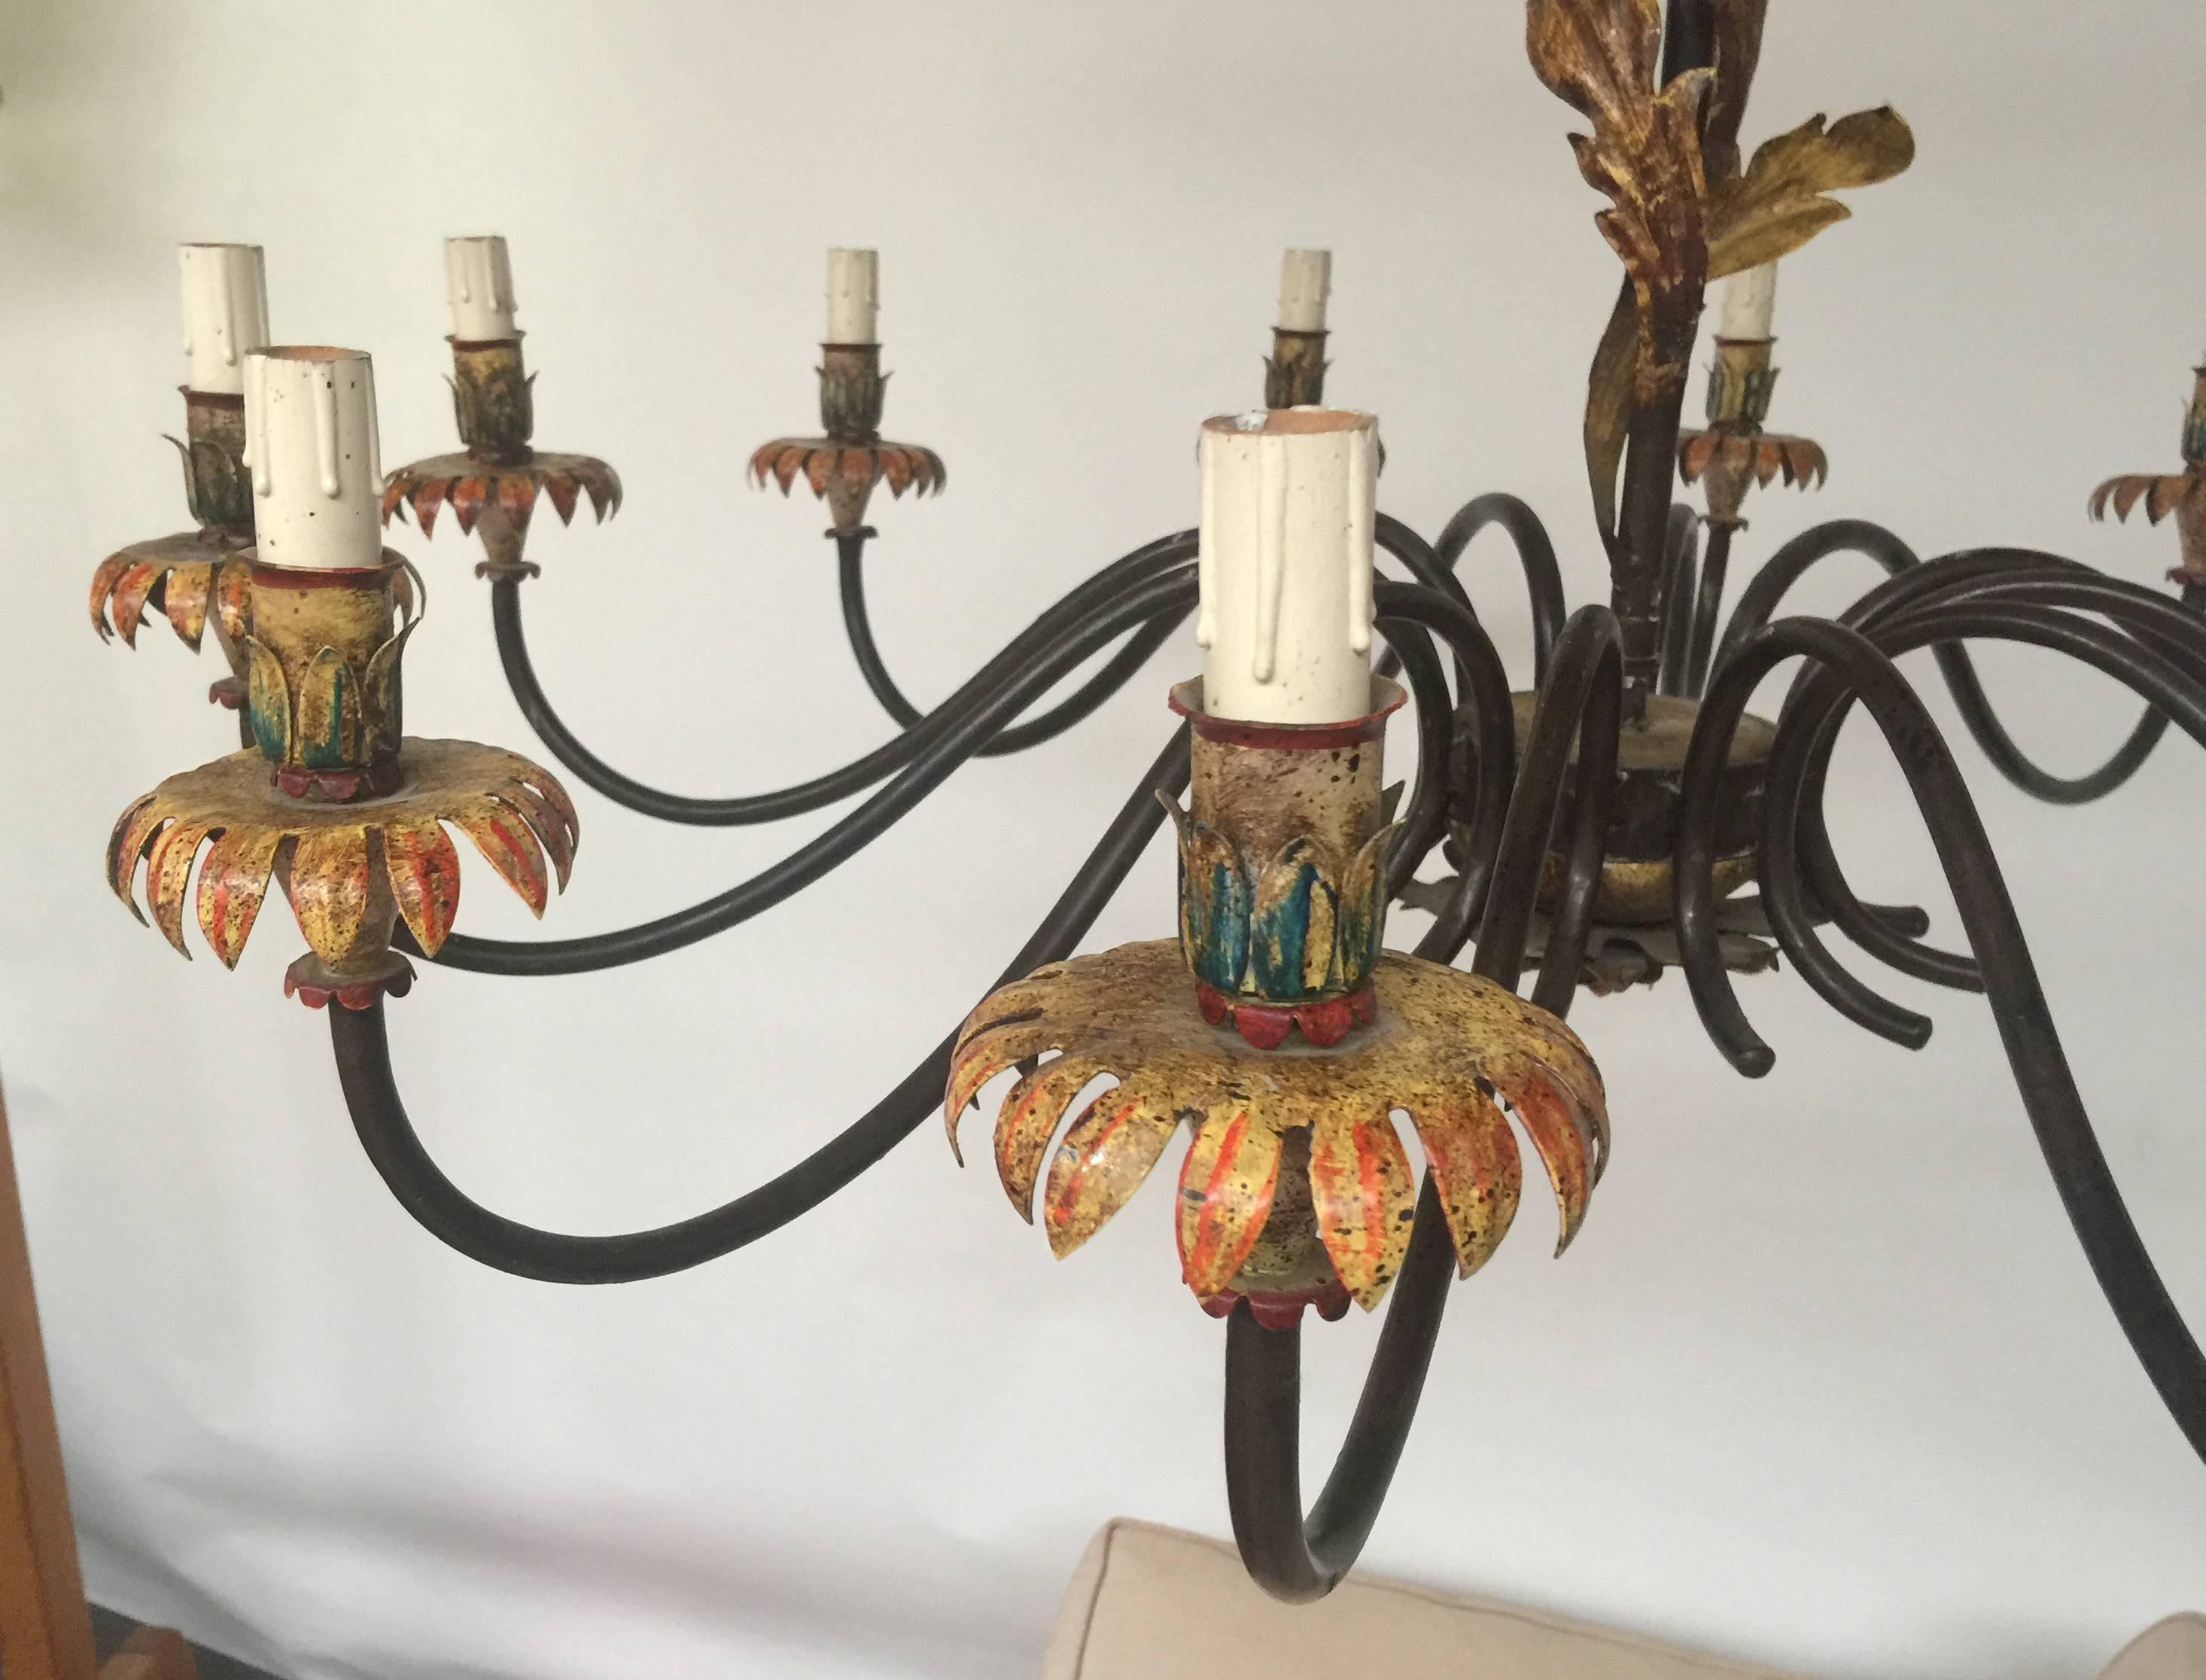 Twelve lights wrought iron chandelier
Neoromantic style, circa 1970.
Part of an important set including three sconces with five lights and nine sconces with two lights.